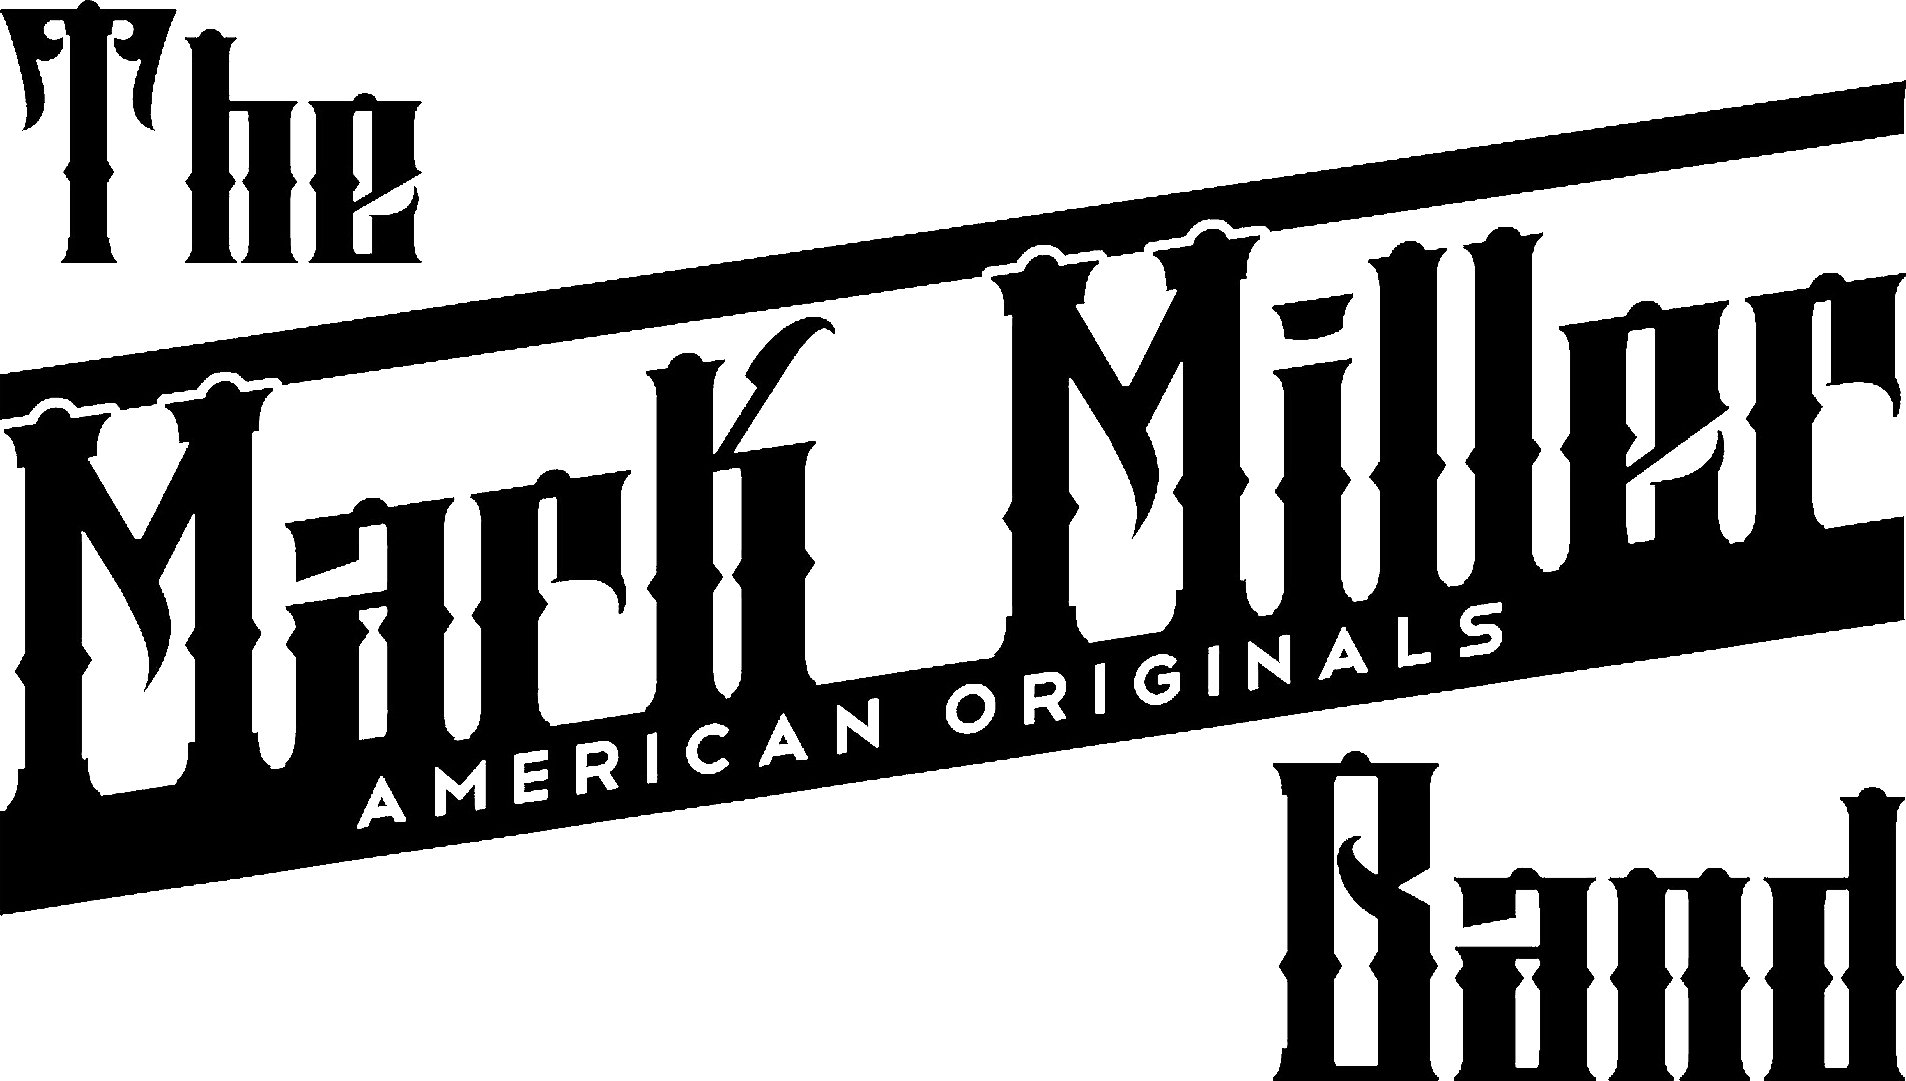 The Mark Miller Band